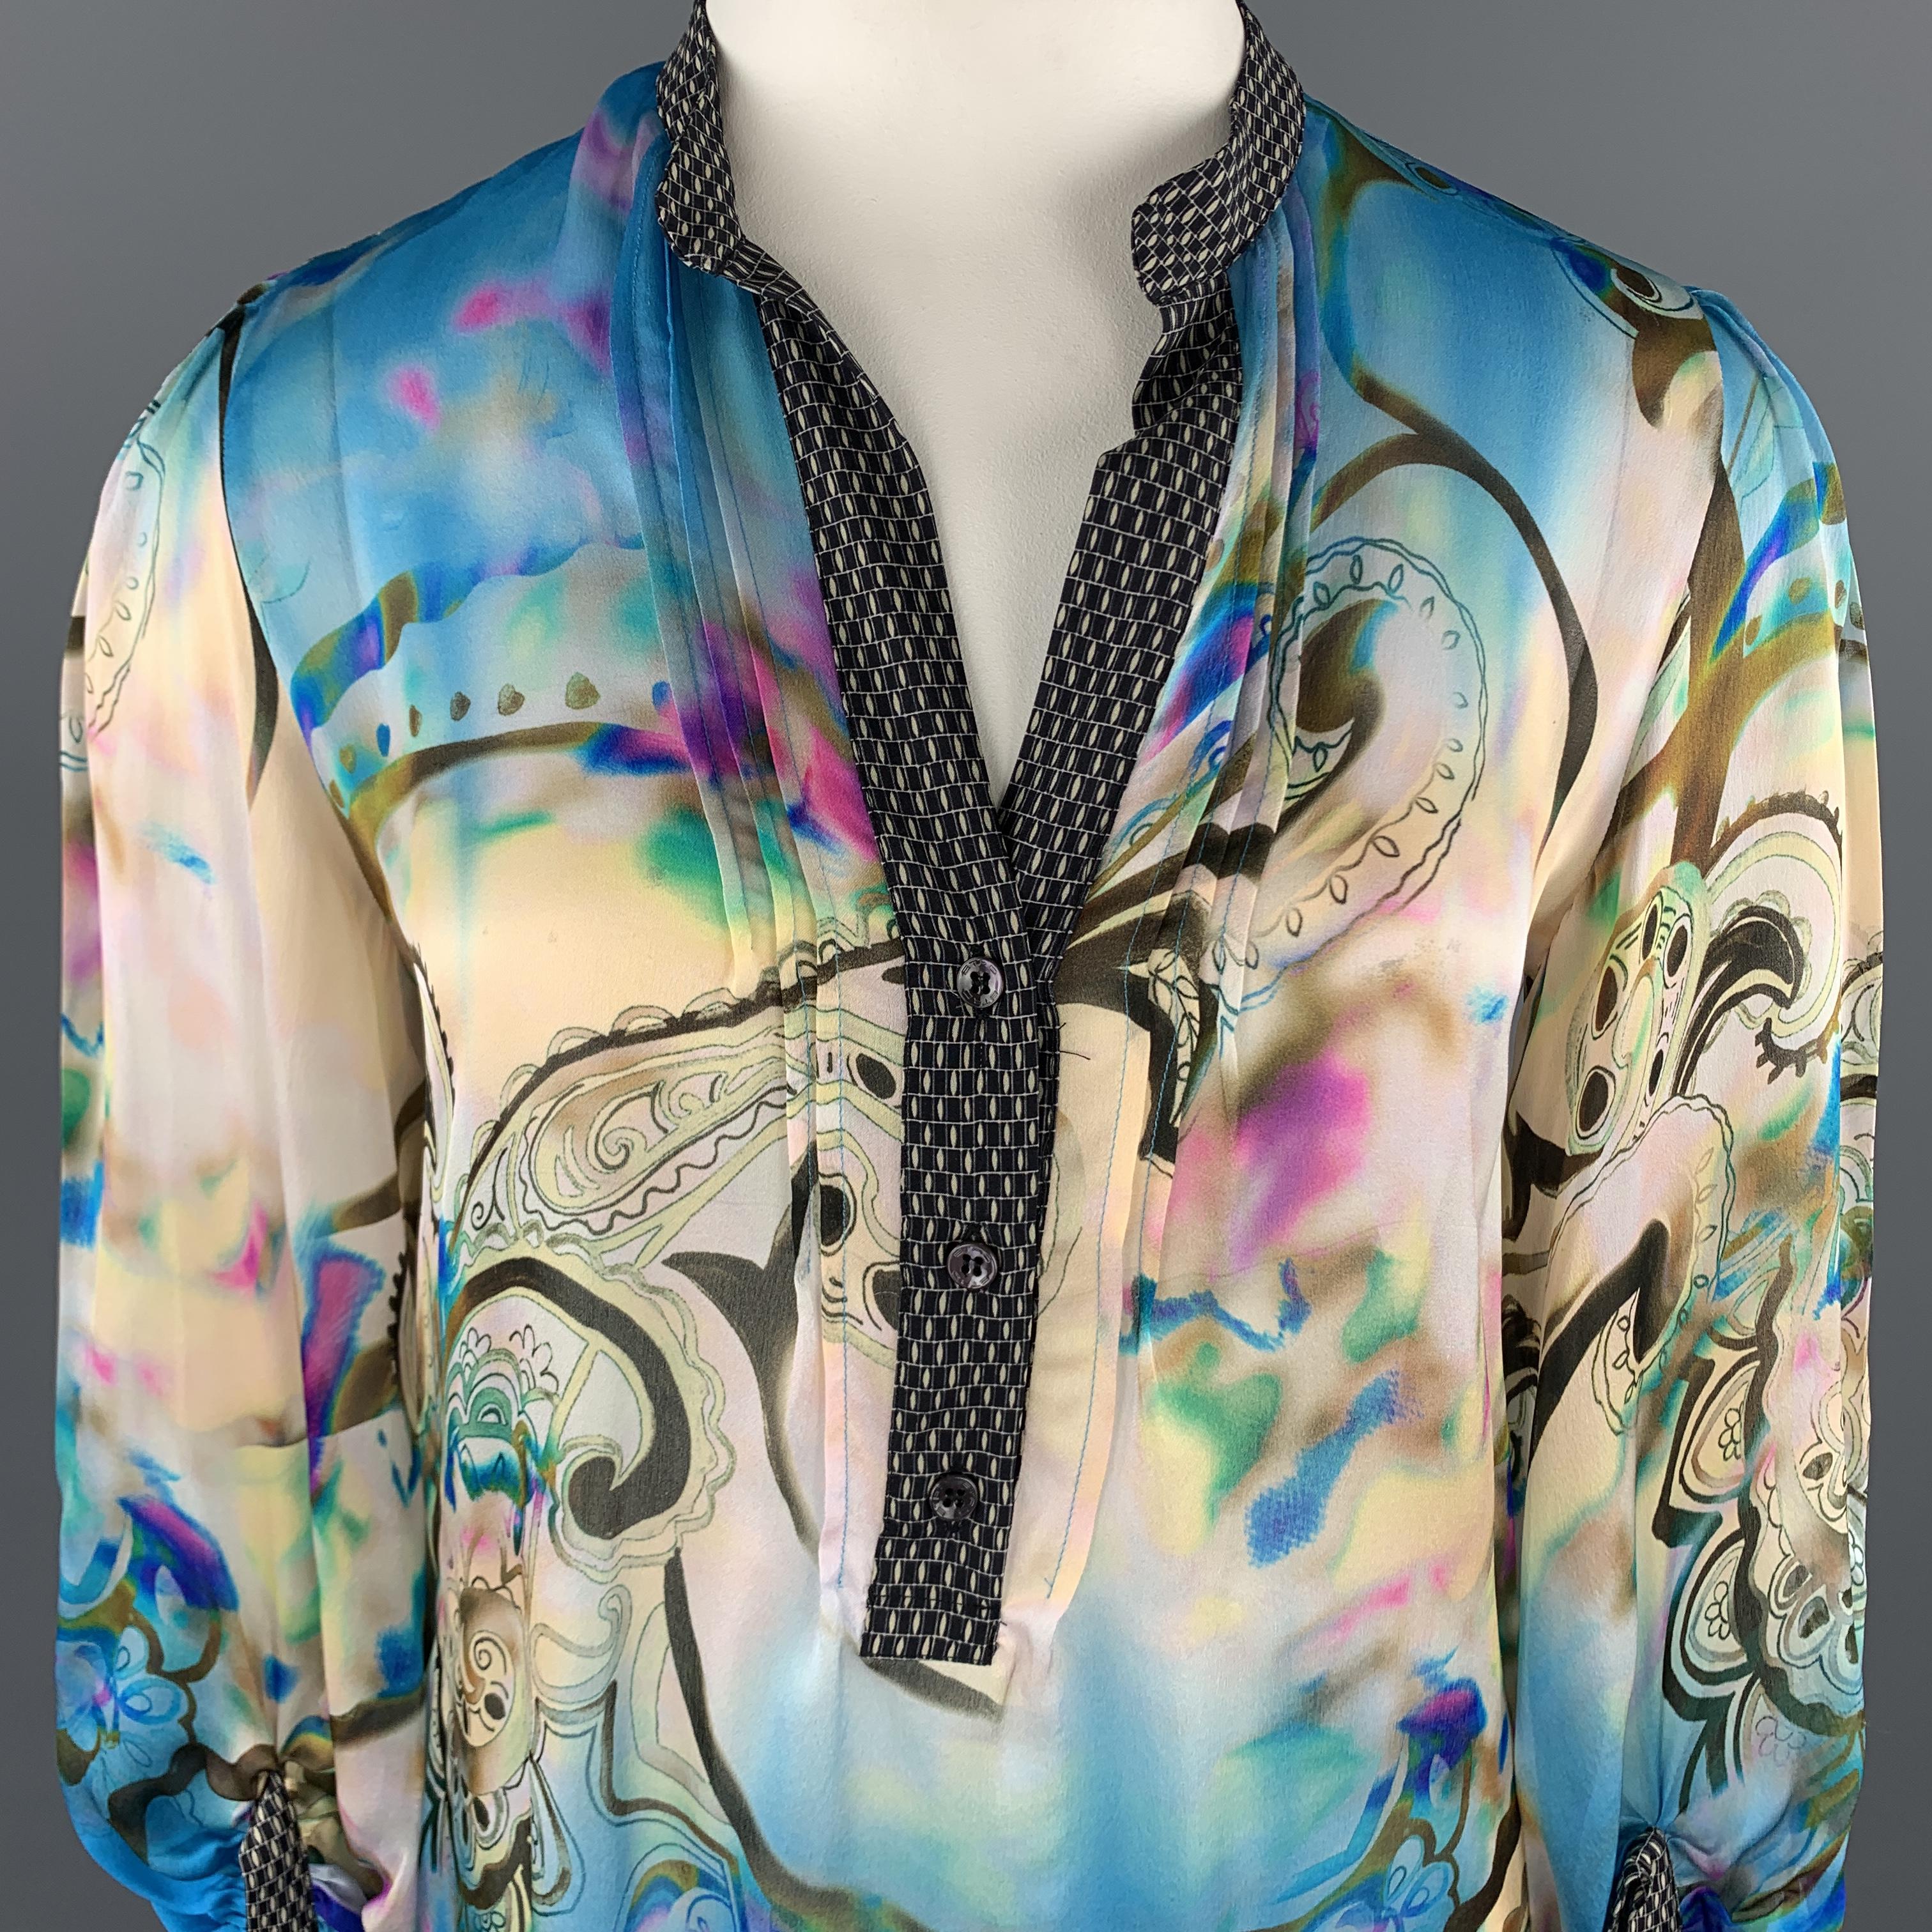 ETRO blouse comes in watercolor print silk chiffon with paisley a motif, printed band collar, and gathered sleeves. Made in Italy.

Excellent Pre-Owned Condition.
Marked: IT 48

Measurements:

Shoulder: 16 in.
Bust: 40 in.
Sleeve: 19 in.
Length: 29